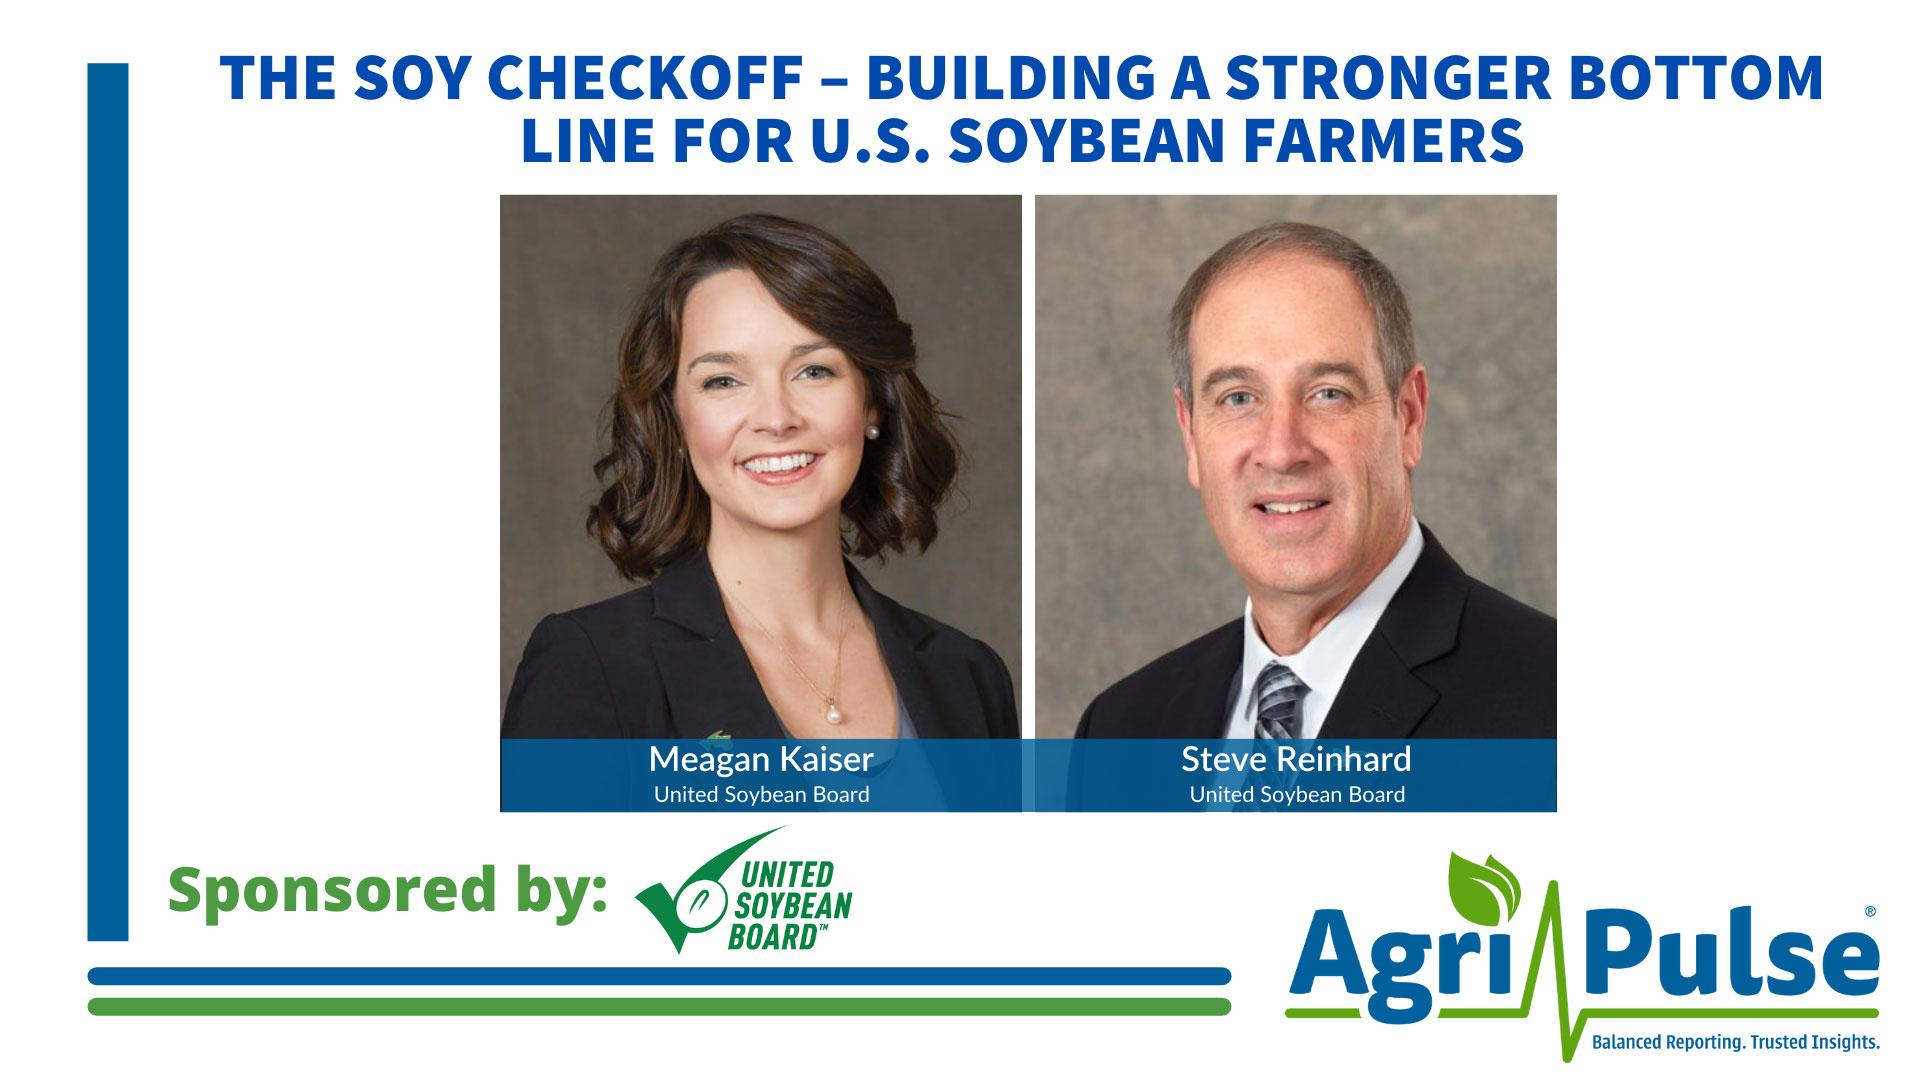 The Soy Checkoff – Building a Stronger Bottom Line for U.S. Soybean Farmers